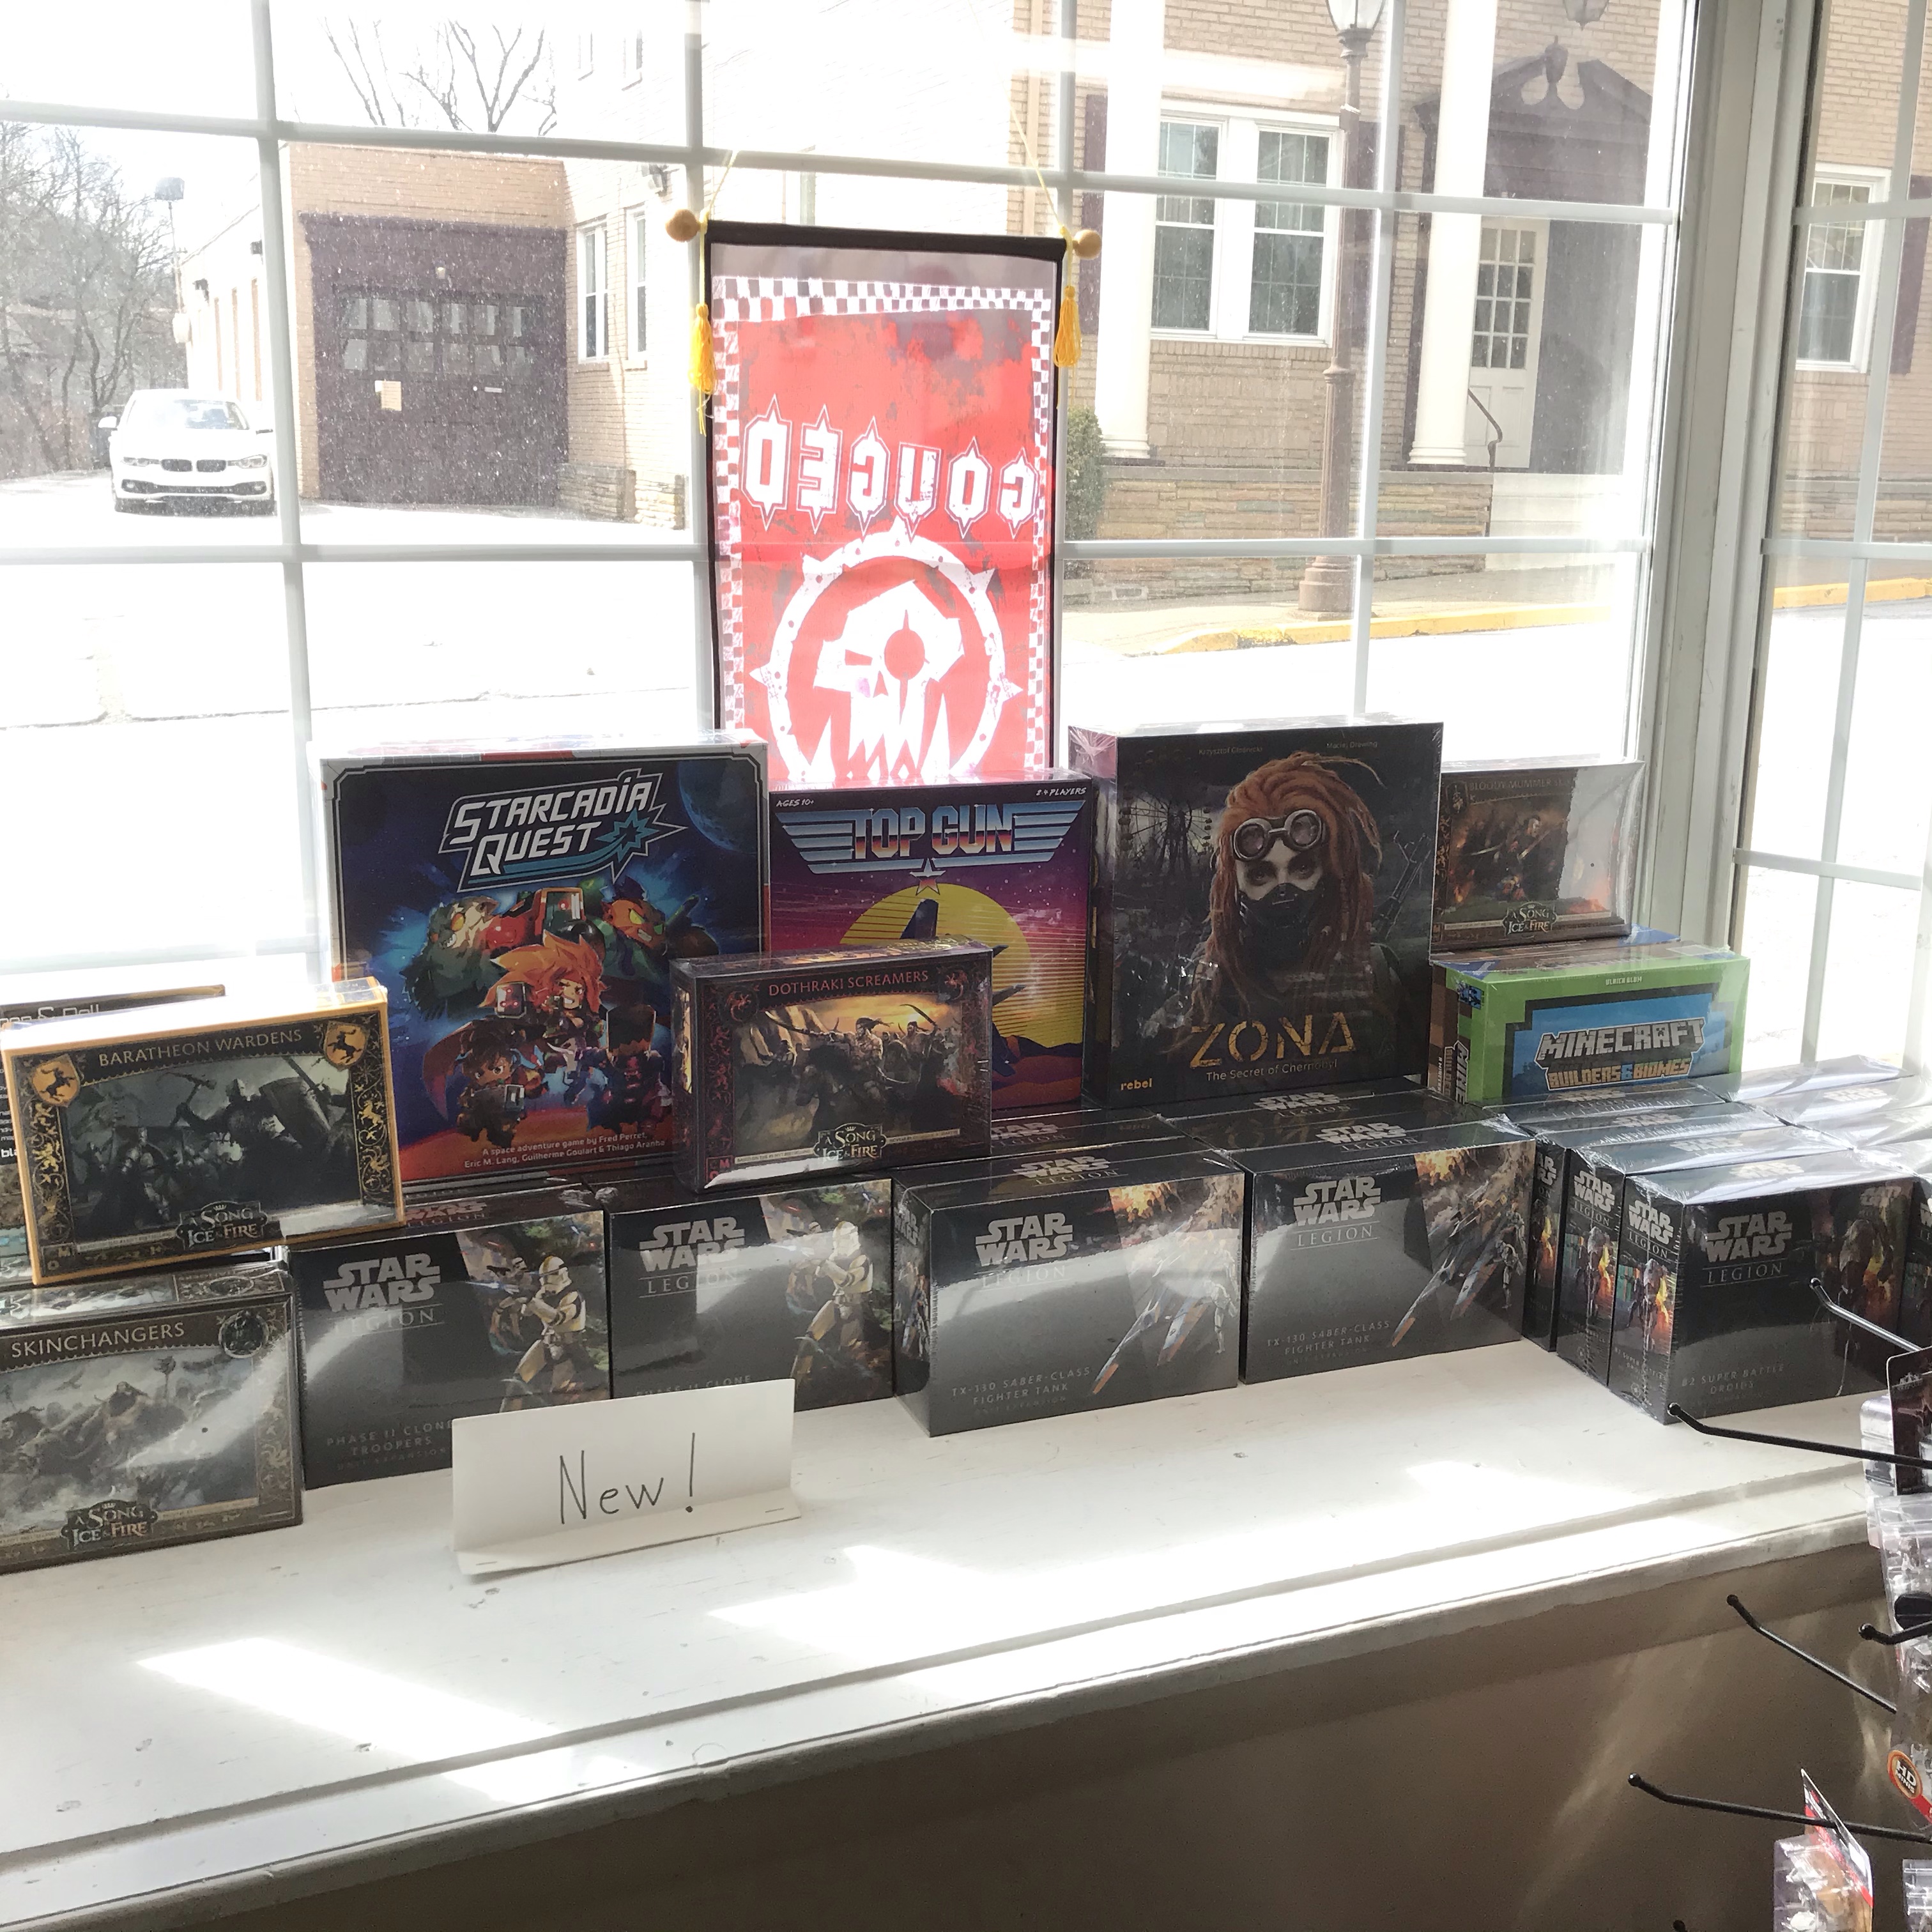 A Galaxy of New Games!